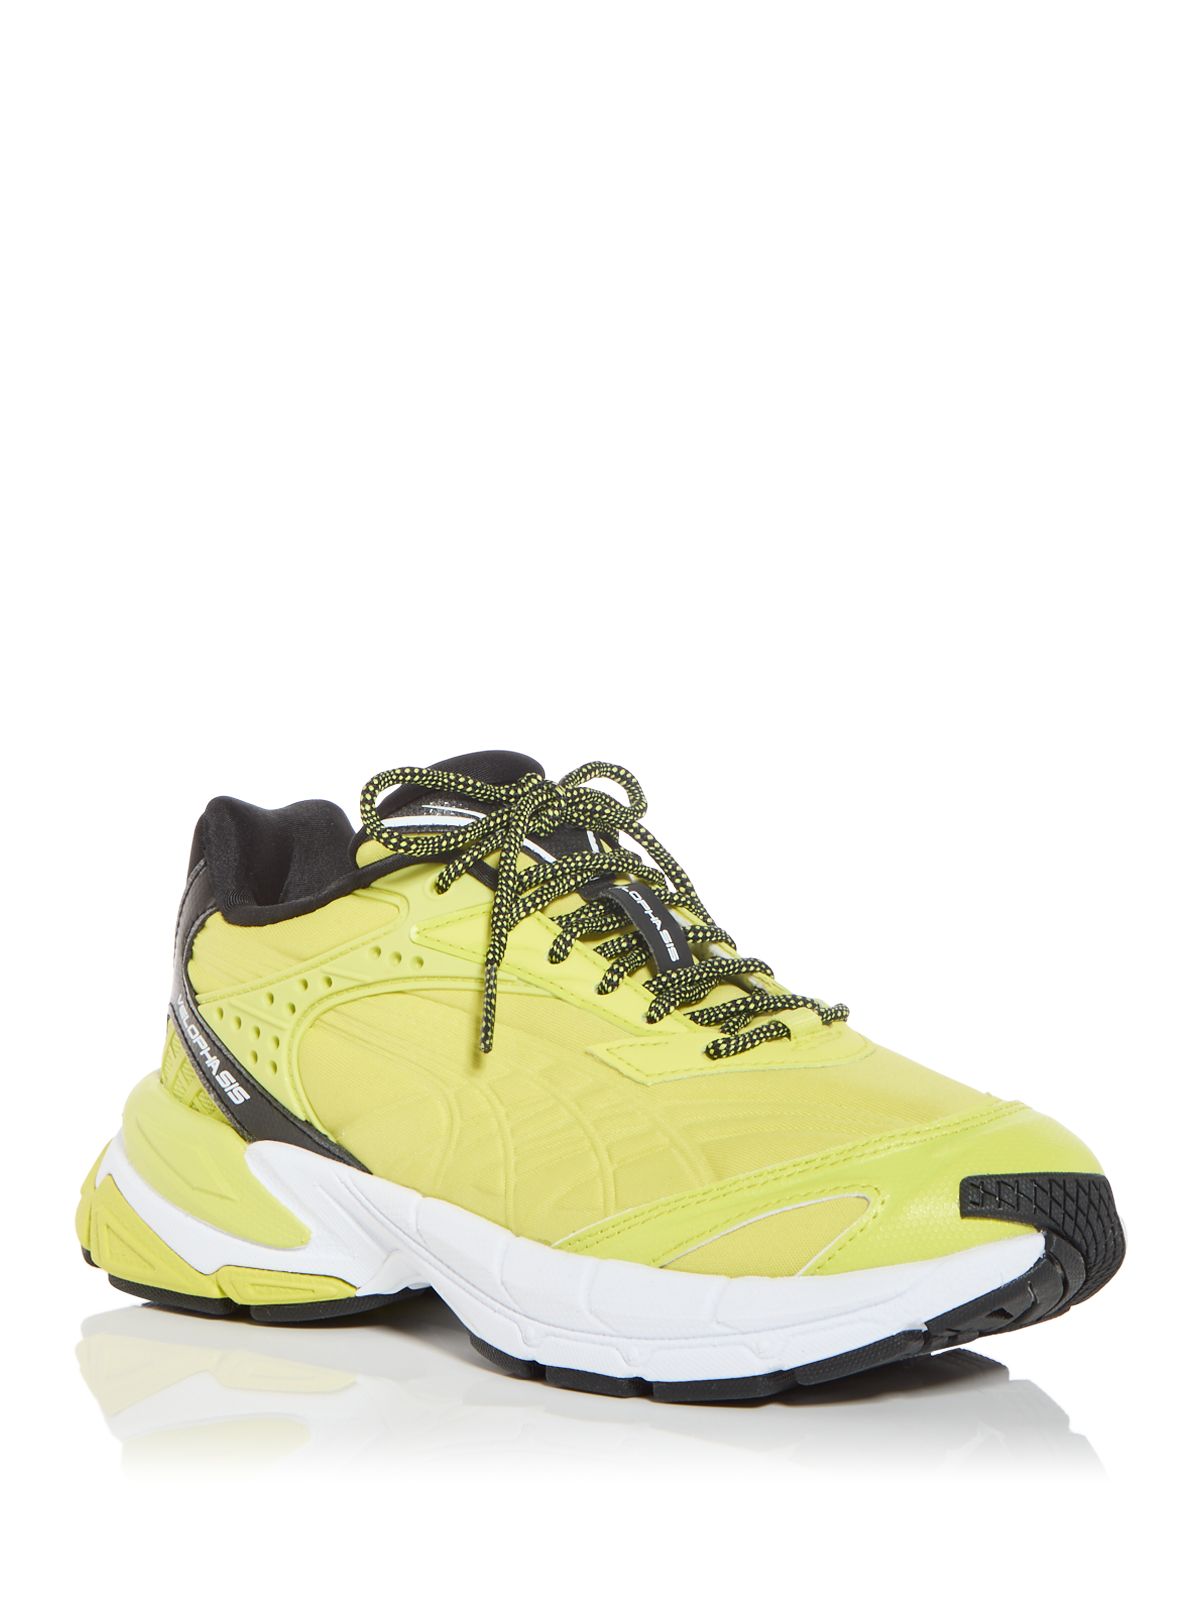 PUMA Womens Yellow Mixed Media Cushioned Velophasis B.t.w. Round Toe Lace-Up Sneakers Shoes 6.5 M